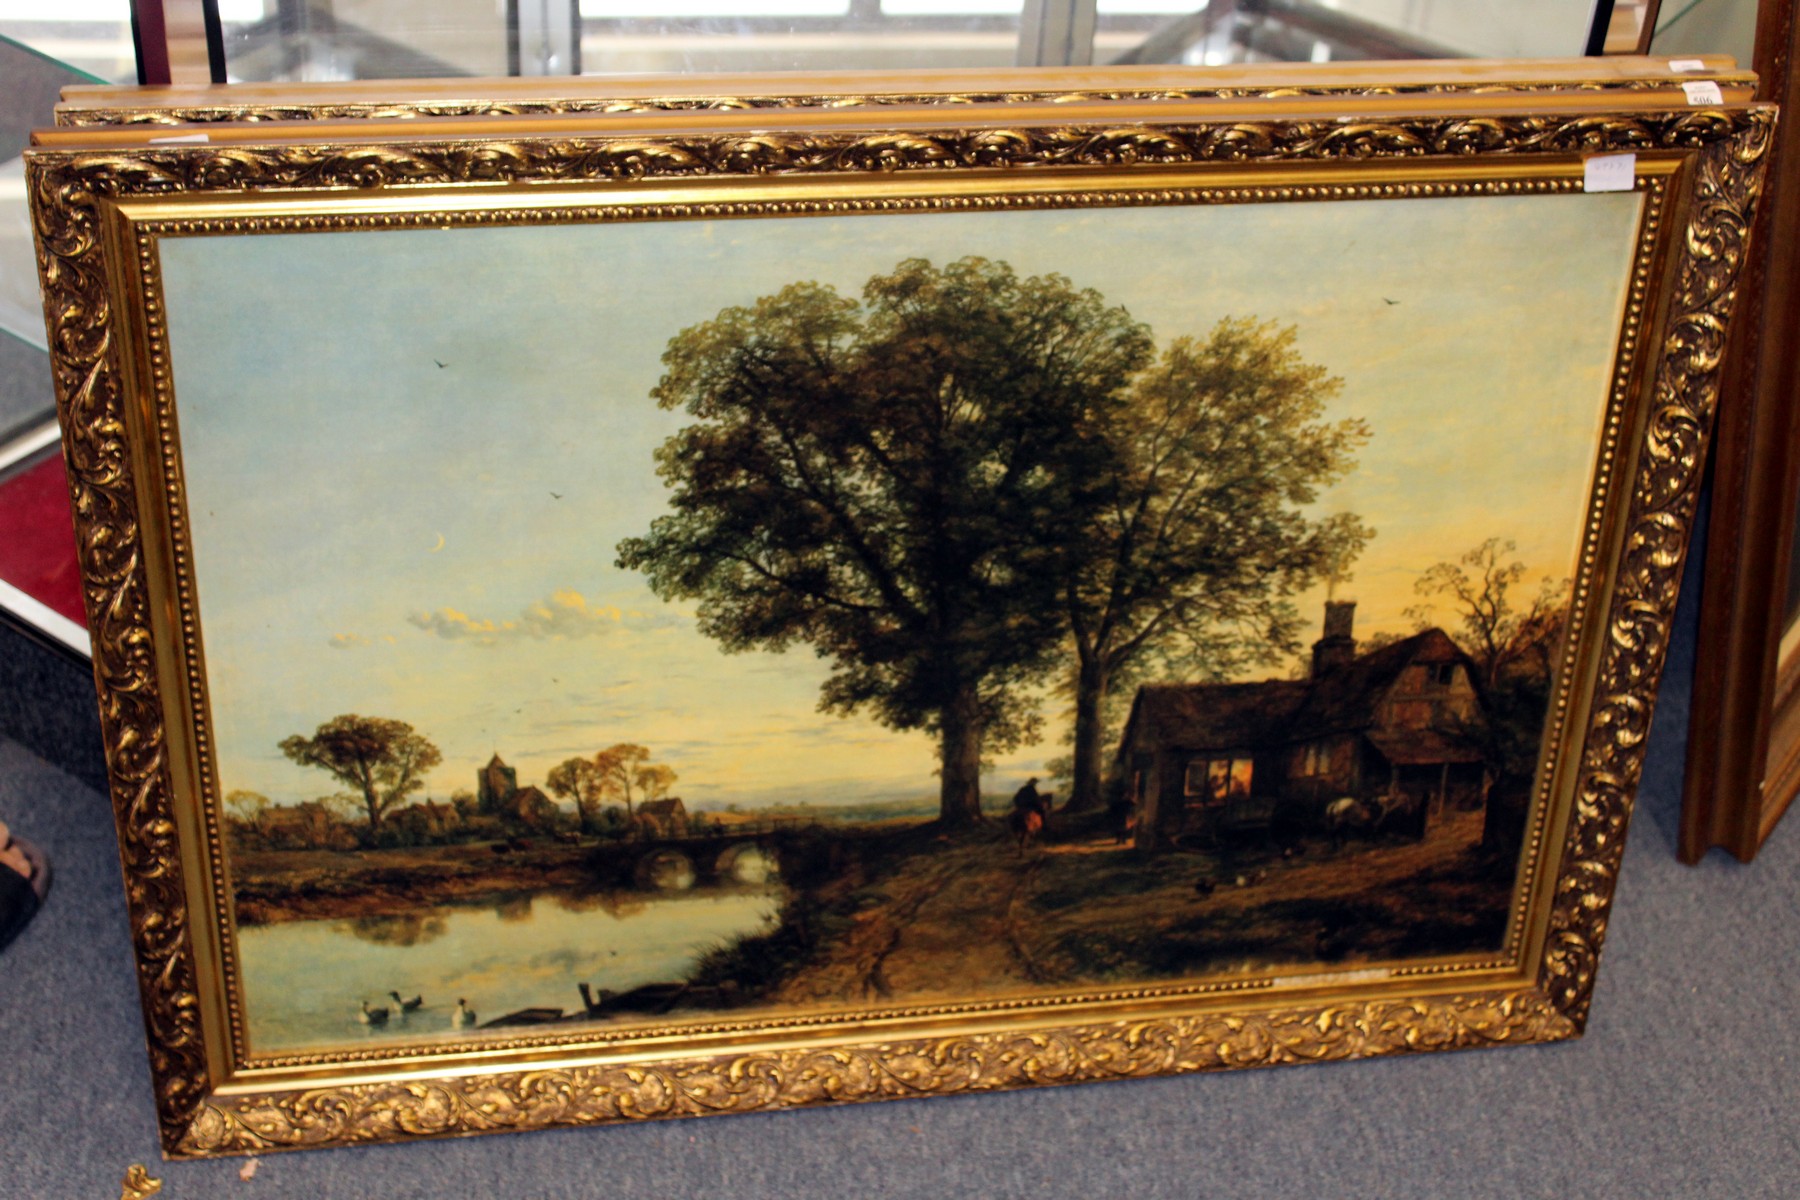 Rural landscape with a figure on horseback country cottage and trees by a river colour print on